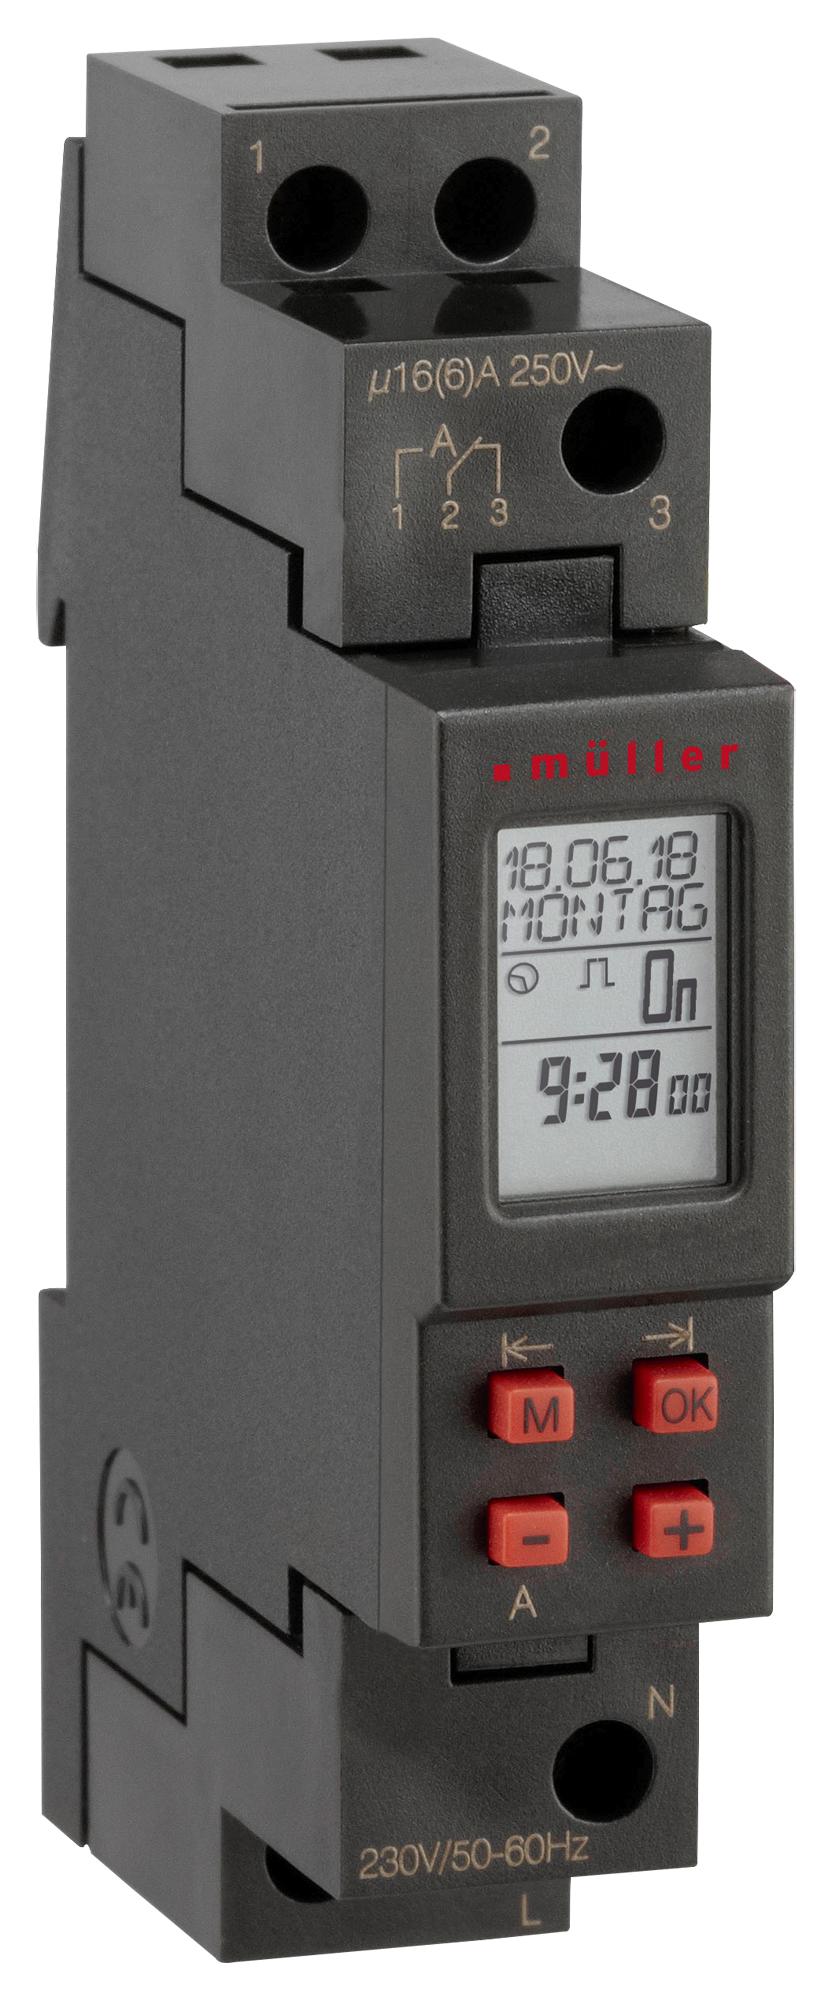 SC08.11 DIGITAL TIME SWITCH 1 CHANNEL MULLER